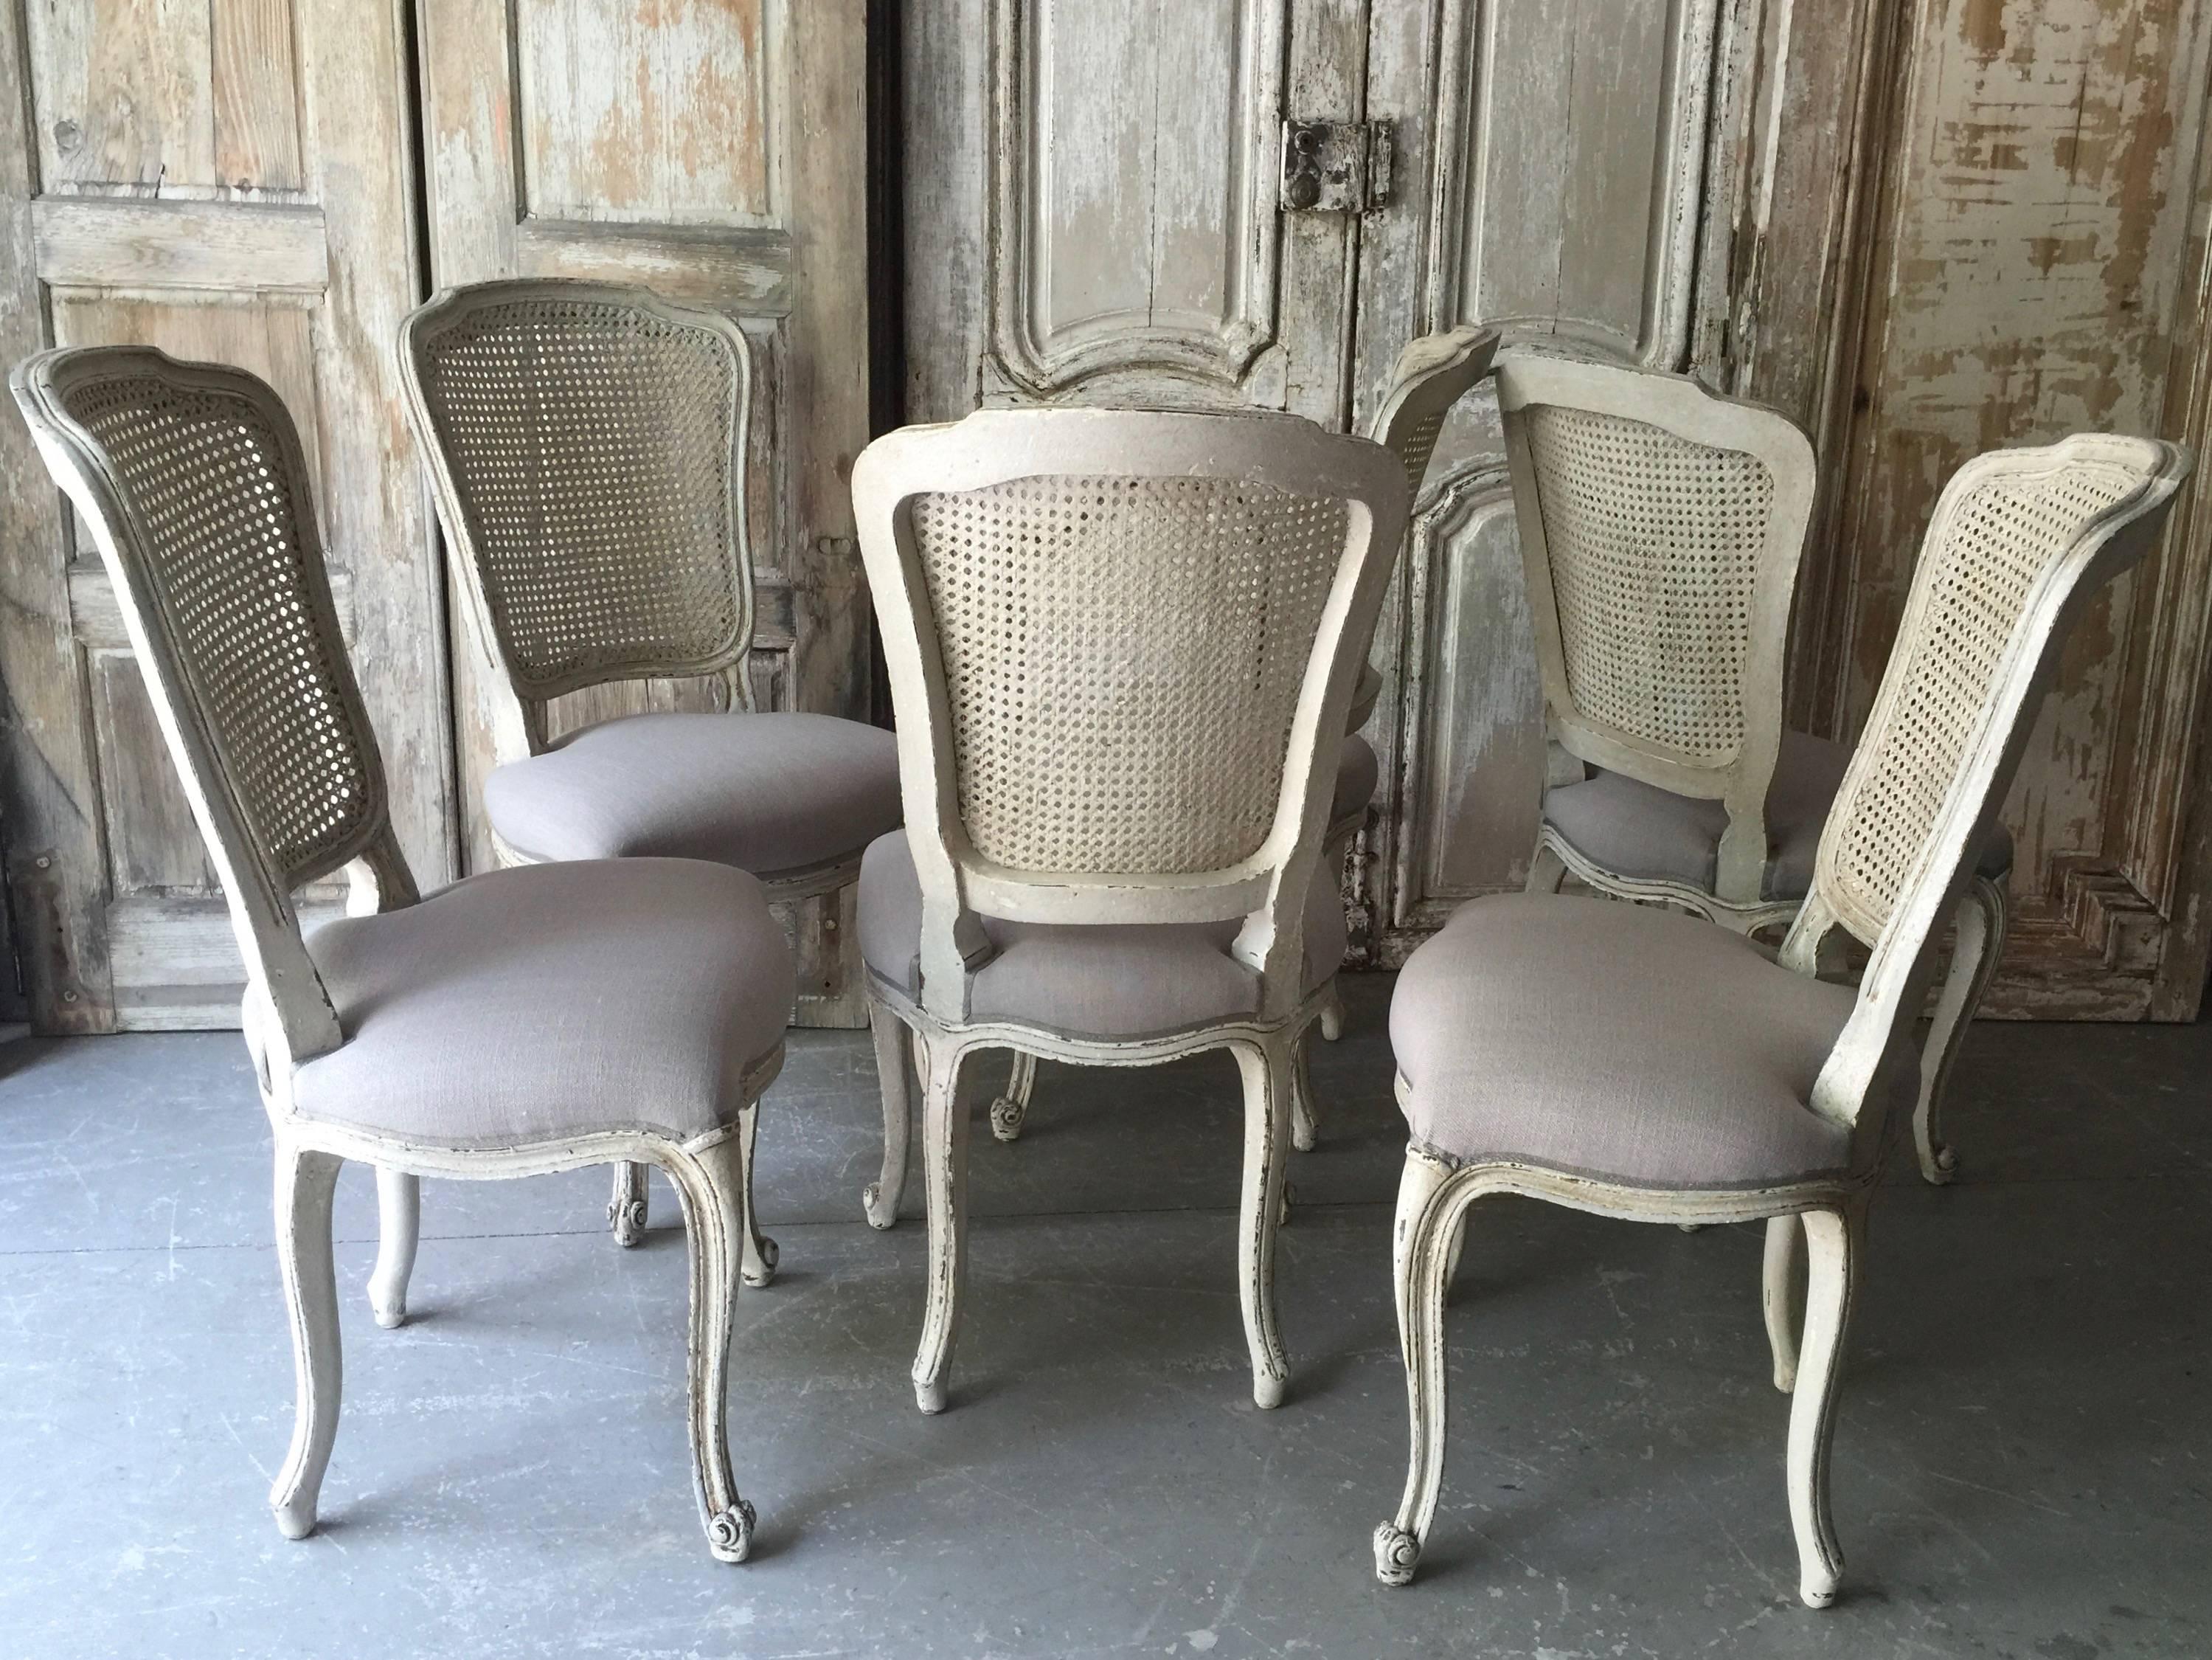 Set of French chairs Louis XV style with flat back called “la Reine” is caned and scalloped frieze carved and raised on cabriole legs. Upholstered in very light gray/natural linen with classical decorative gimp trim. Very elegant as well as